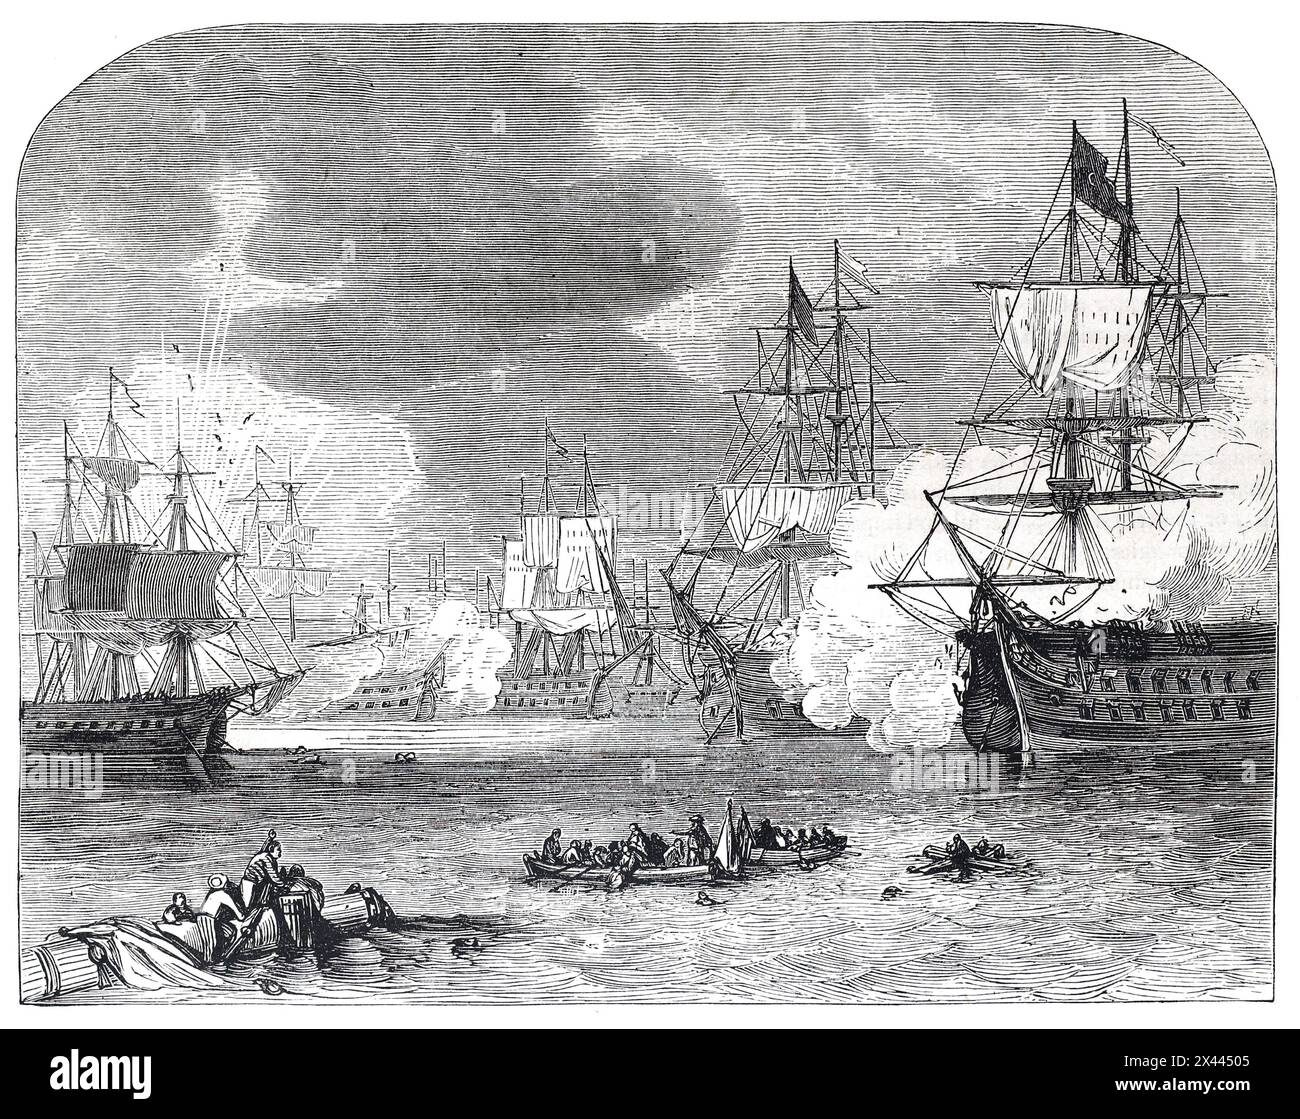 The Battle of Navarino: Illustration from Cassell's History of England, Vol VII. New Edition published Circa 1873-5. The Battle of Navarino was a naval battle fought on 20 October 1827, during the Greek War of Independence (1821–1829), in Navarino Bay, on the west coast of the Peloponnese peninsula, in the Ionian Sea. The allied navies of Britain, France and Russia decisively defeated the Ottoman and Egyptian forces who were attempting the suppress the Greeks. Stock Photo